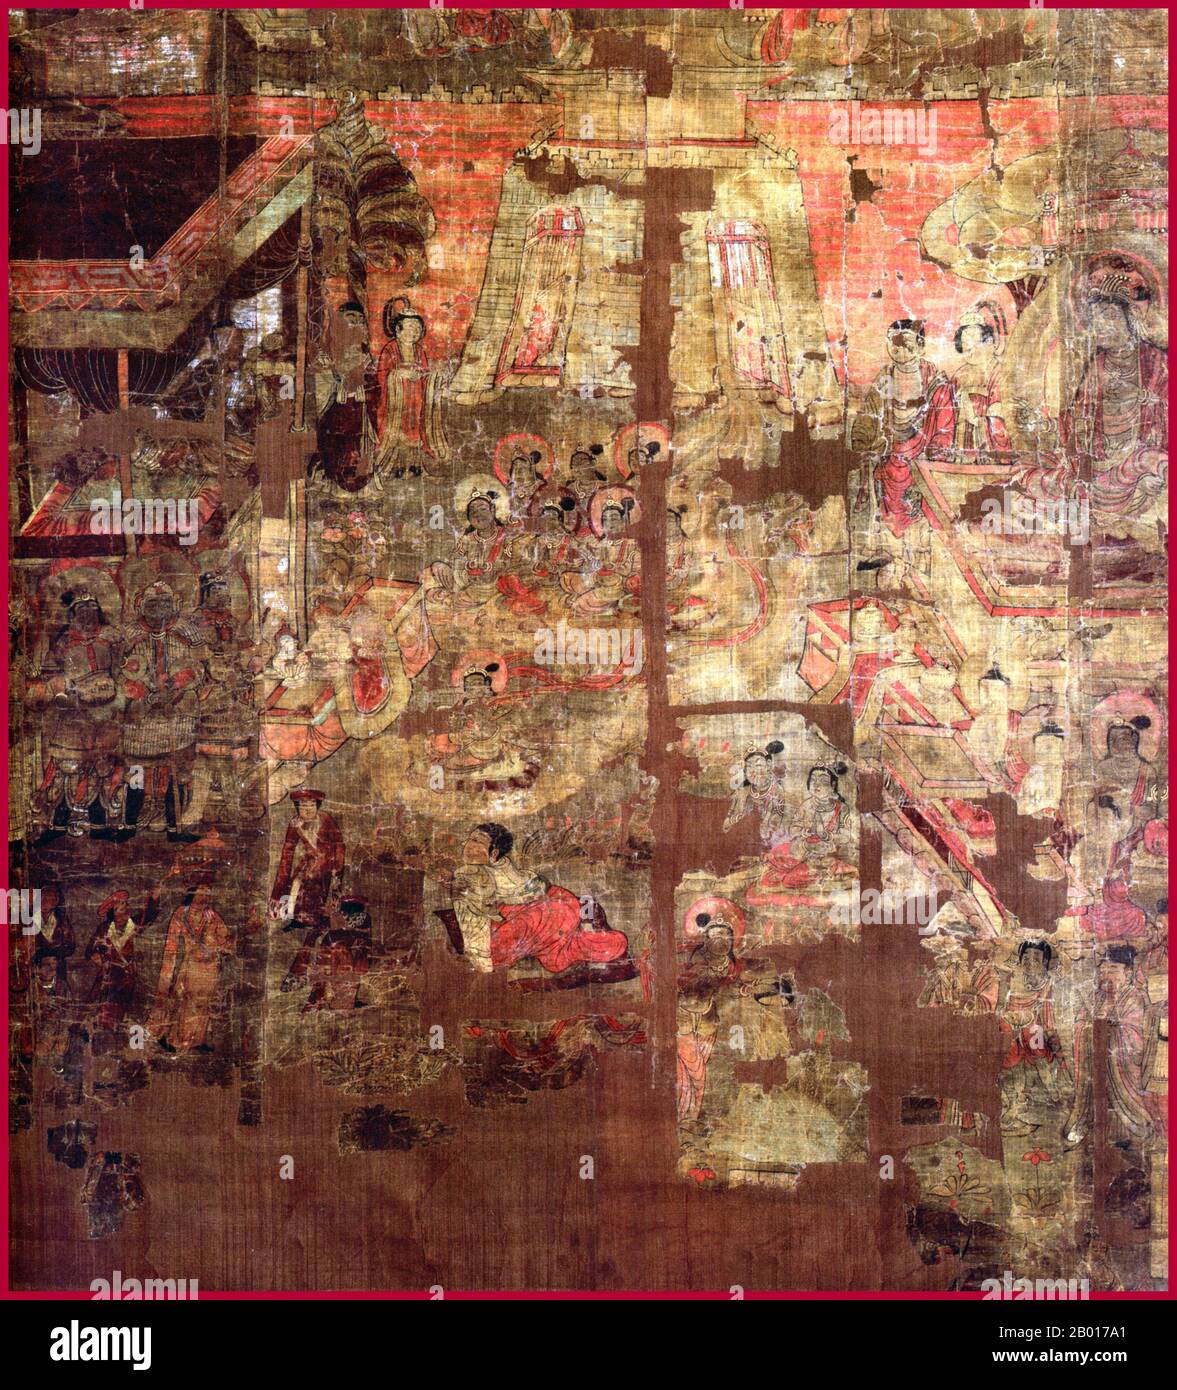 China: The Tibetan king of Dunhuang attending a debate between the Bodhisattva Manjusri and the layman Vimalakirti. Hanging scroll painting, Mogao Caves, Dunhuang, 8th century.  The Vimalakīrti Sutra is a Mahayana Buddhist sutra. Among other subjects, the sutra teaches the meaning of nonduality. An important aspect of this scripture is that it contains a report of a teaching addressed to both arhats and bodhisattvas by the layman Vimalakīrti, who expounds the doctrine of Sunyata, or emptiness, to them. This culminates with the wordless teaching of silence. Stock Photo